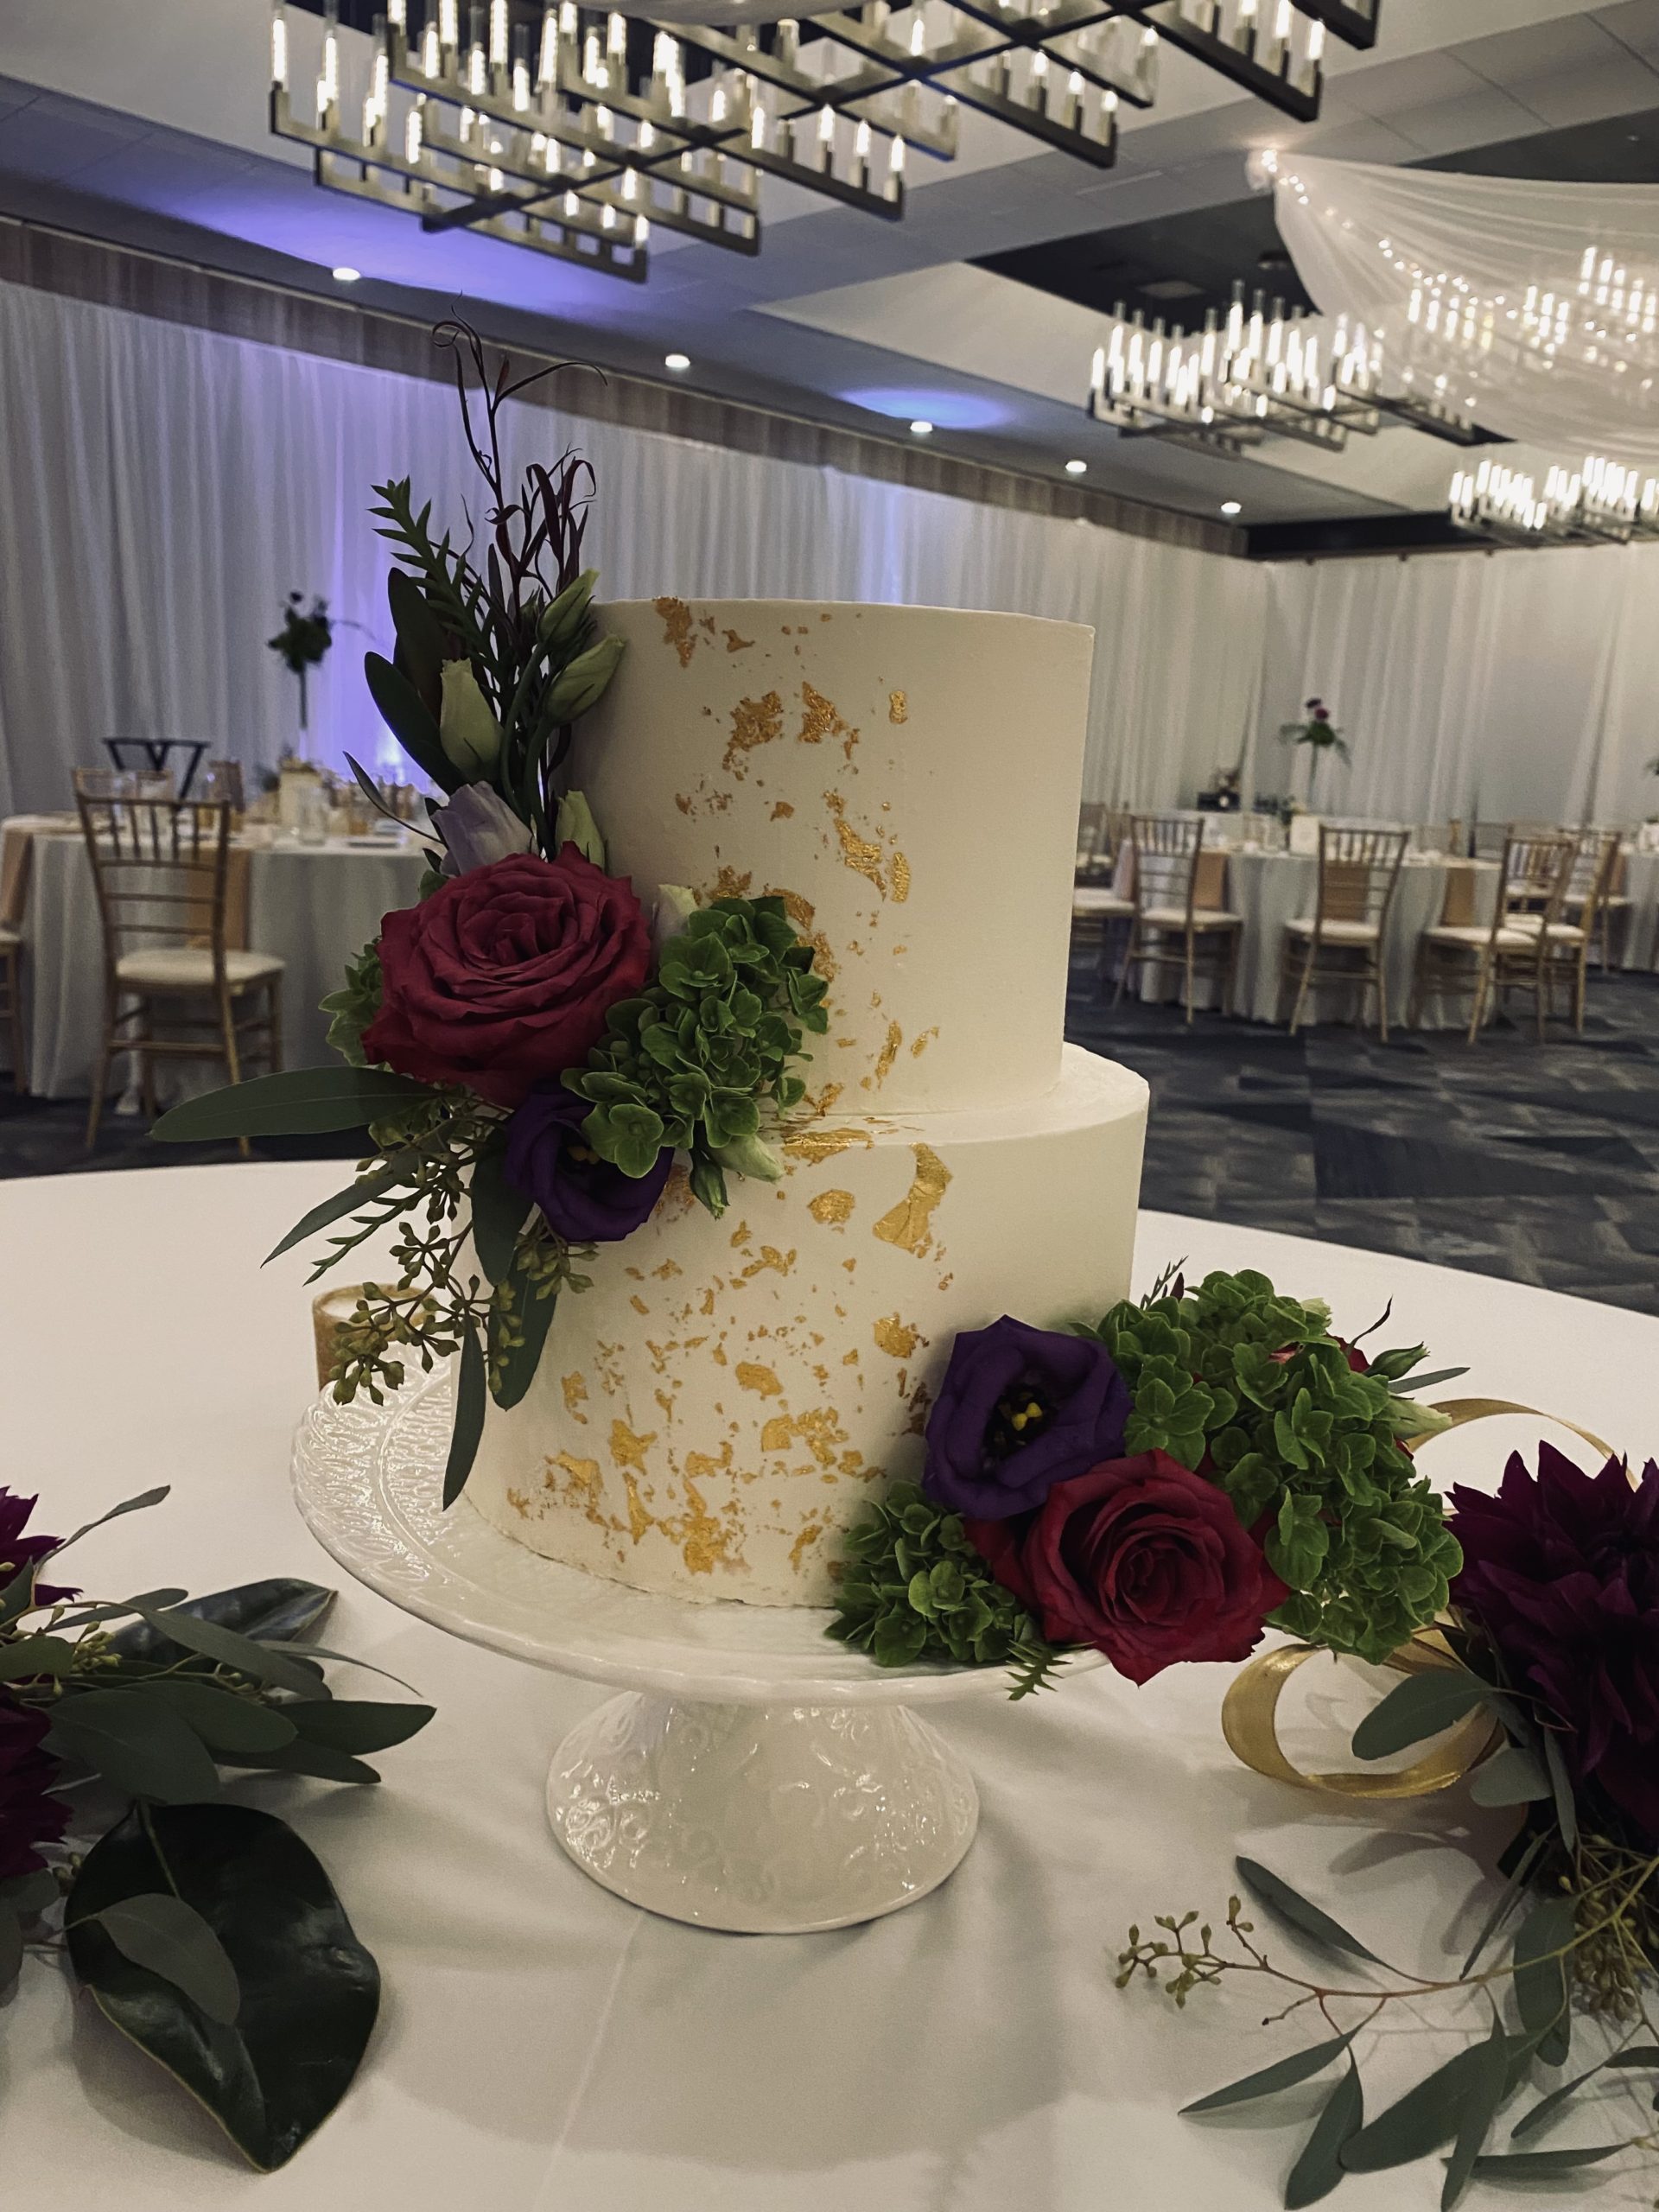 A beautiful 2-tier custom wedding cake with gold leaf and fresh flowers from Village Patisserie in Toledo, Ohio